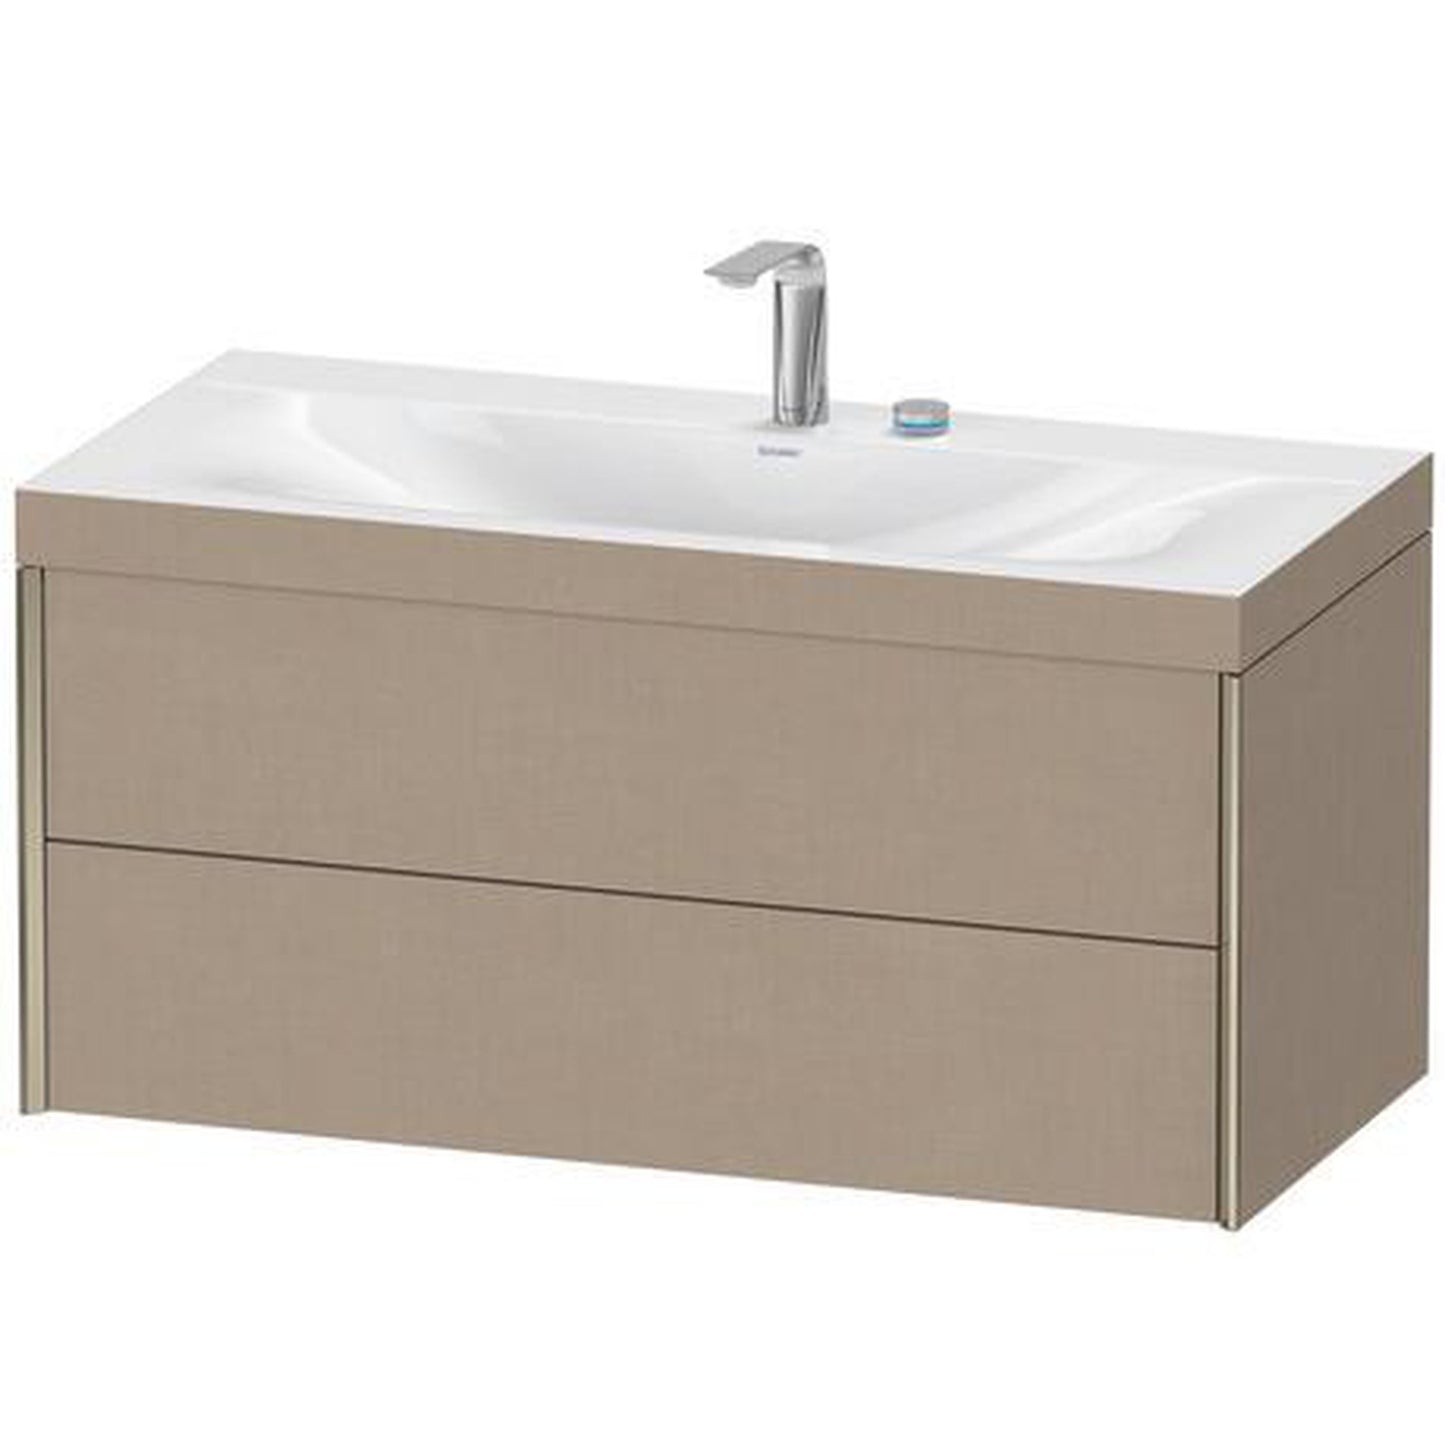 Duravit Xviu 39" x 20" x 19" Two Drawer C-Bonded Wall-Mount Vanity Kit With Two Tap Holes, Linen (XV4616EB175C)